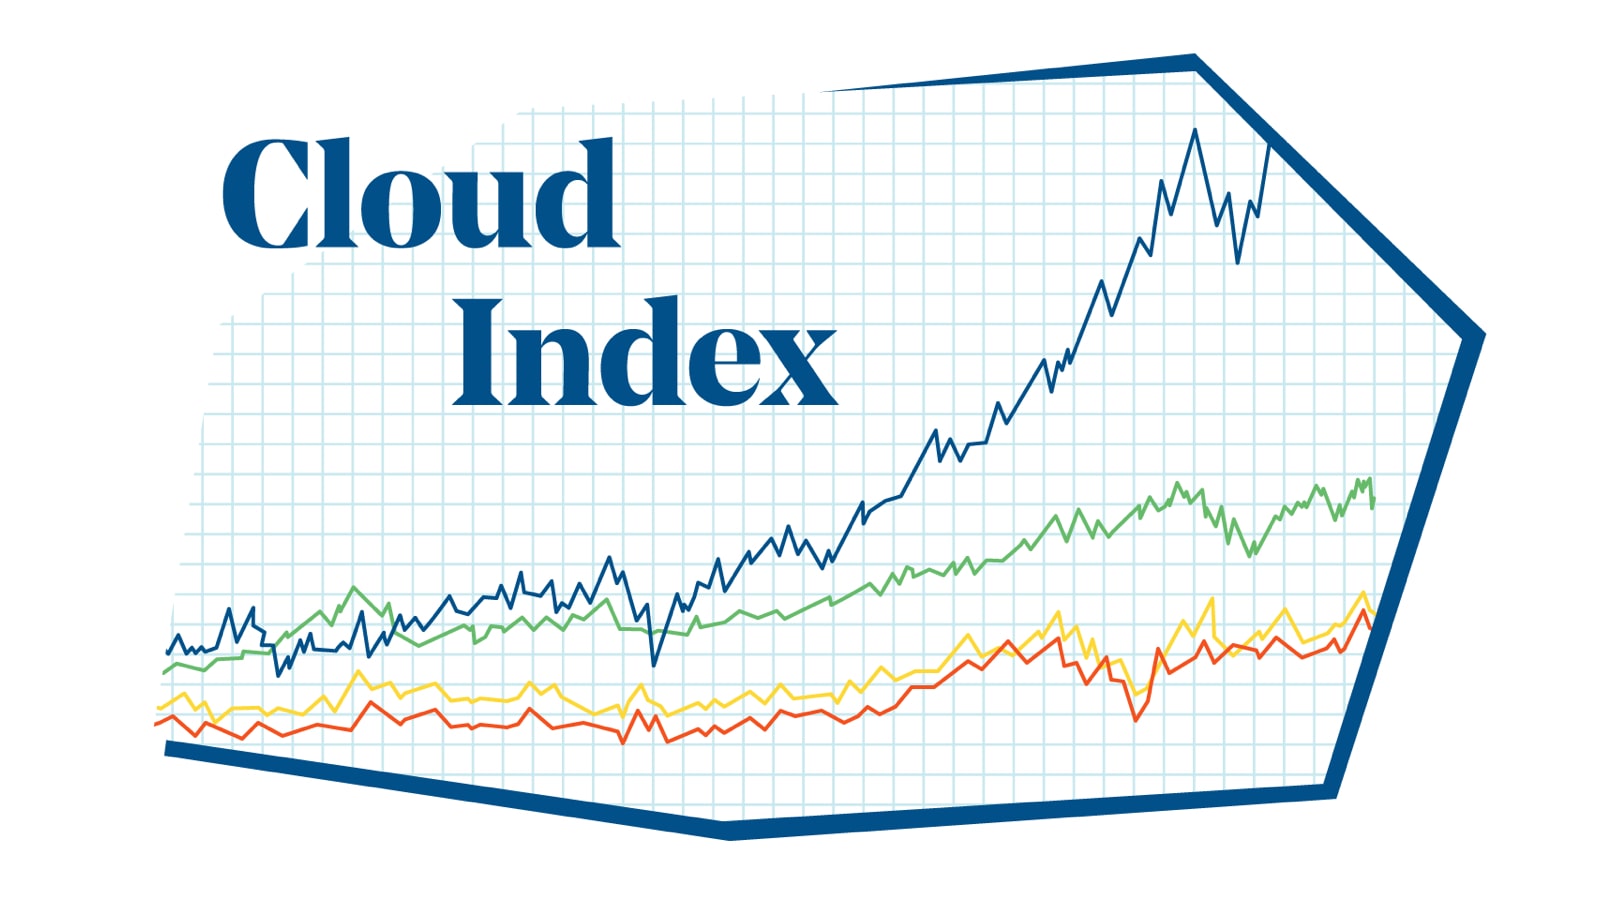 Cloud Index graphic with line chart